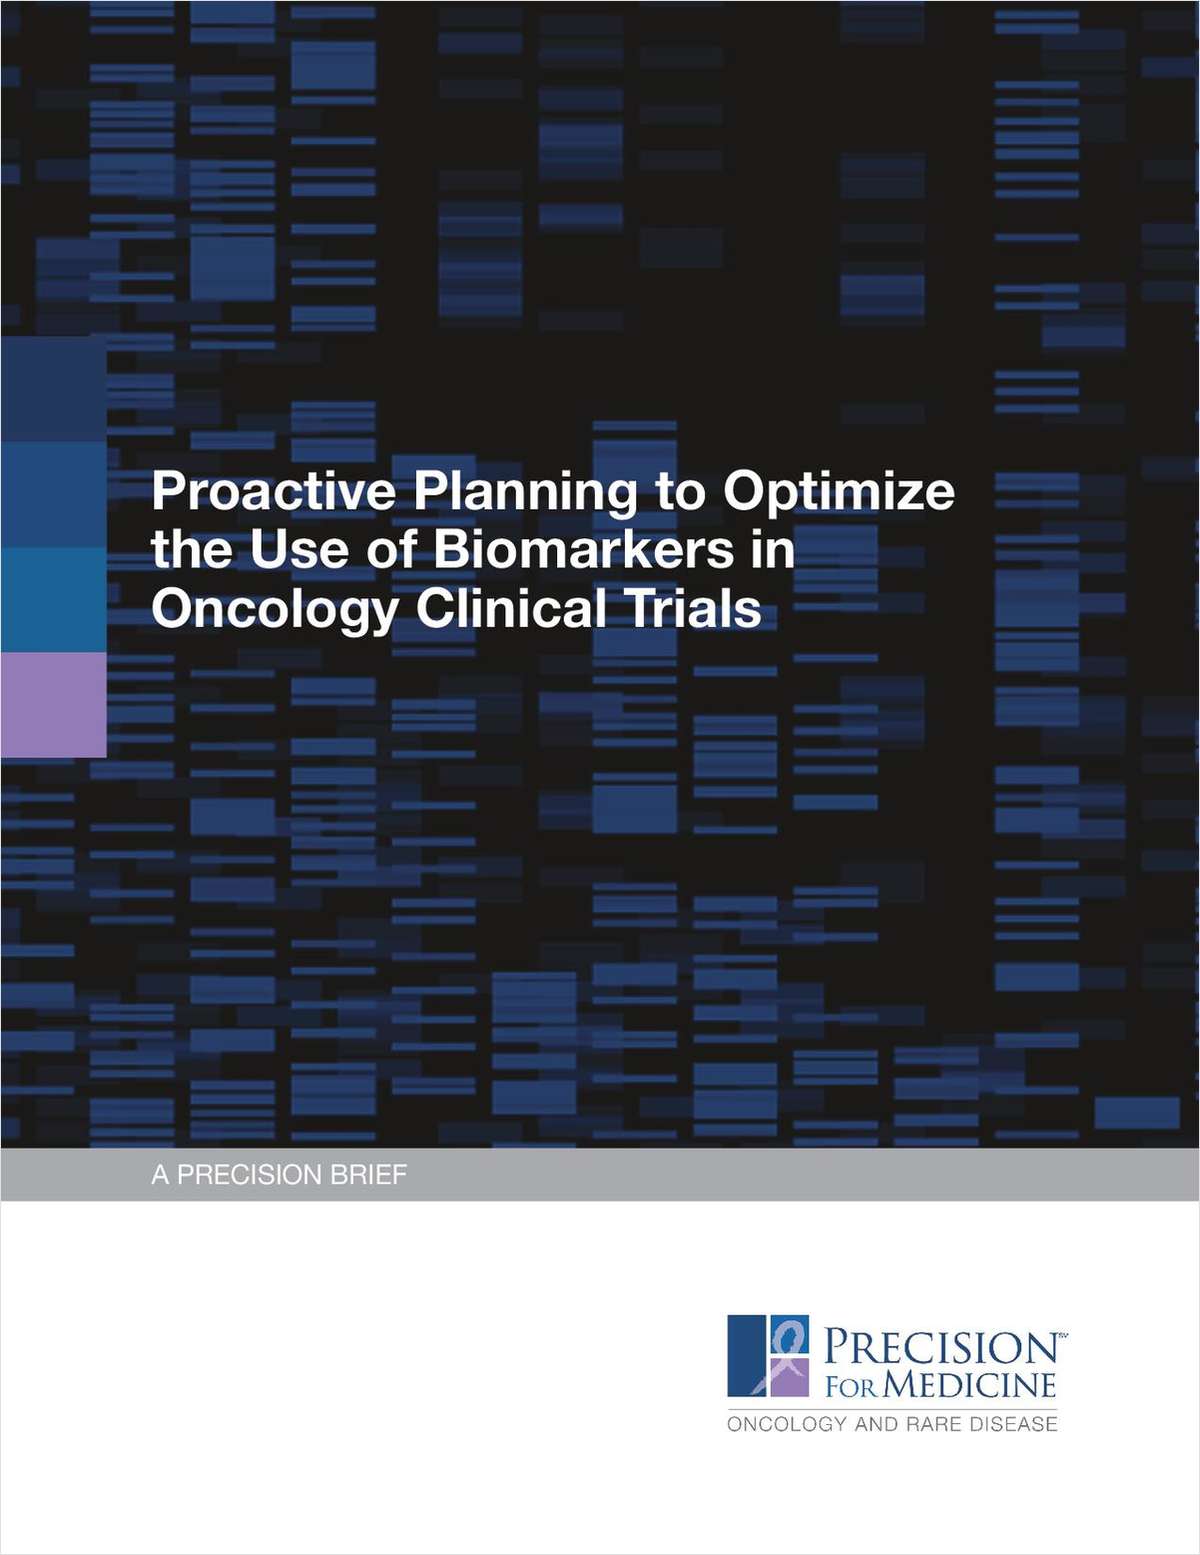 Proactive Planning to Optimize the Use of Biomarkers in Oncology Clinical Trials